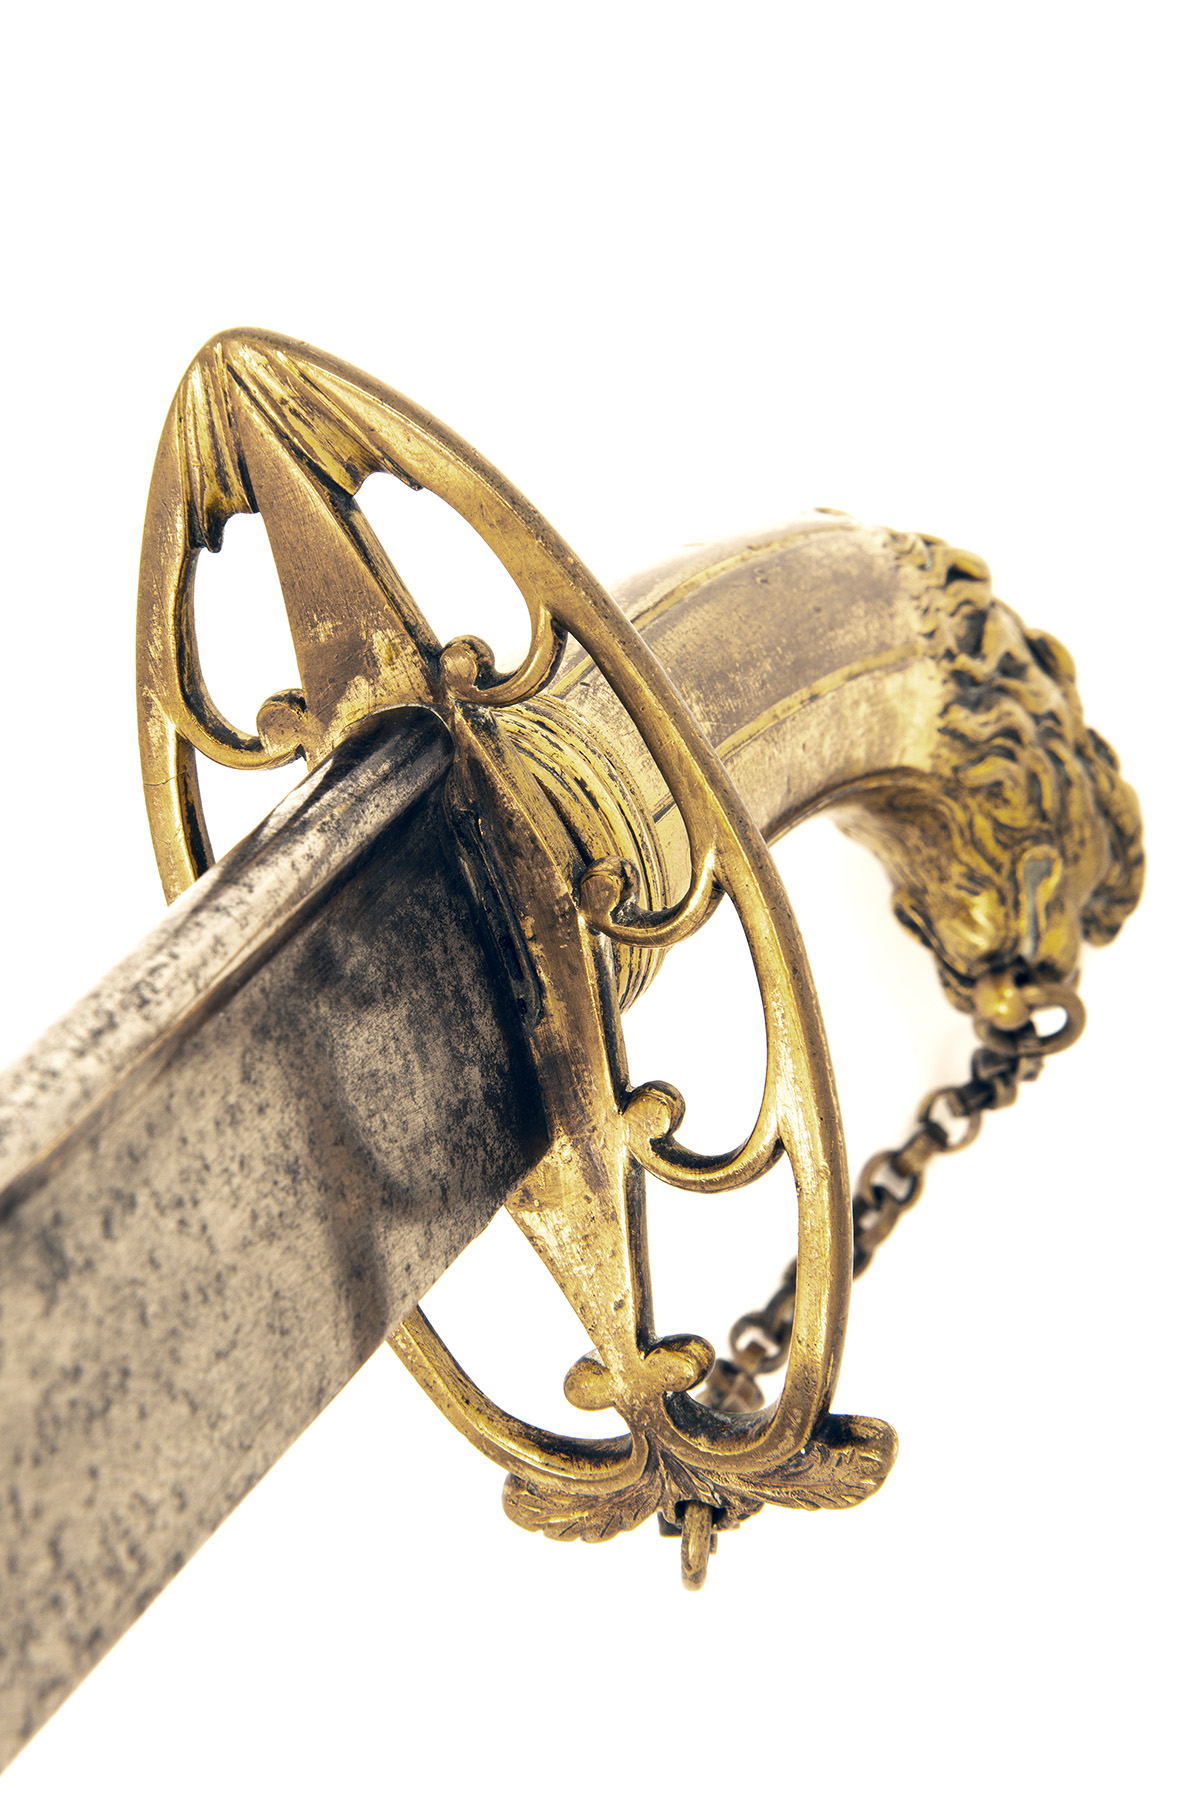 A BRITISH FLANK OFFICER'S SABRE WITH PIPE-BACKED BLADE circa 1785, with curved 29 1/2in. quill- - Image 4 of 4